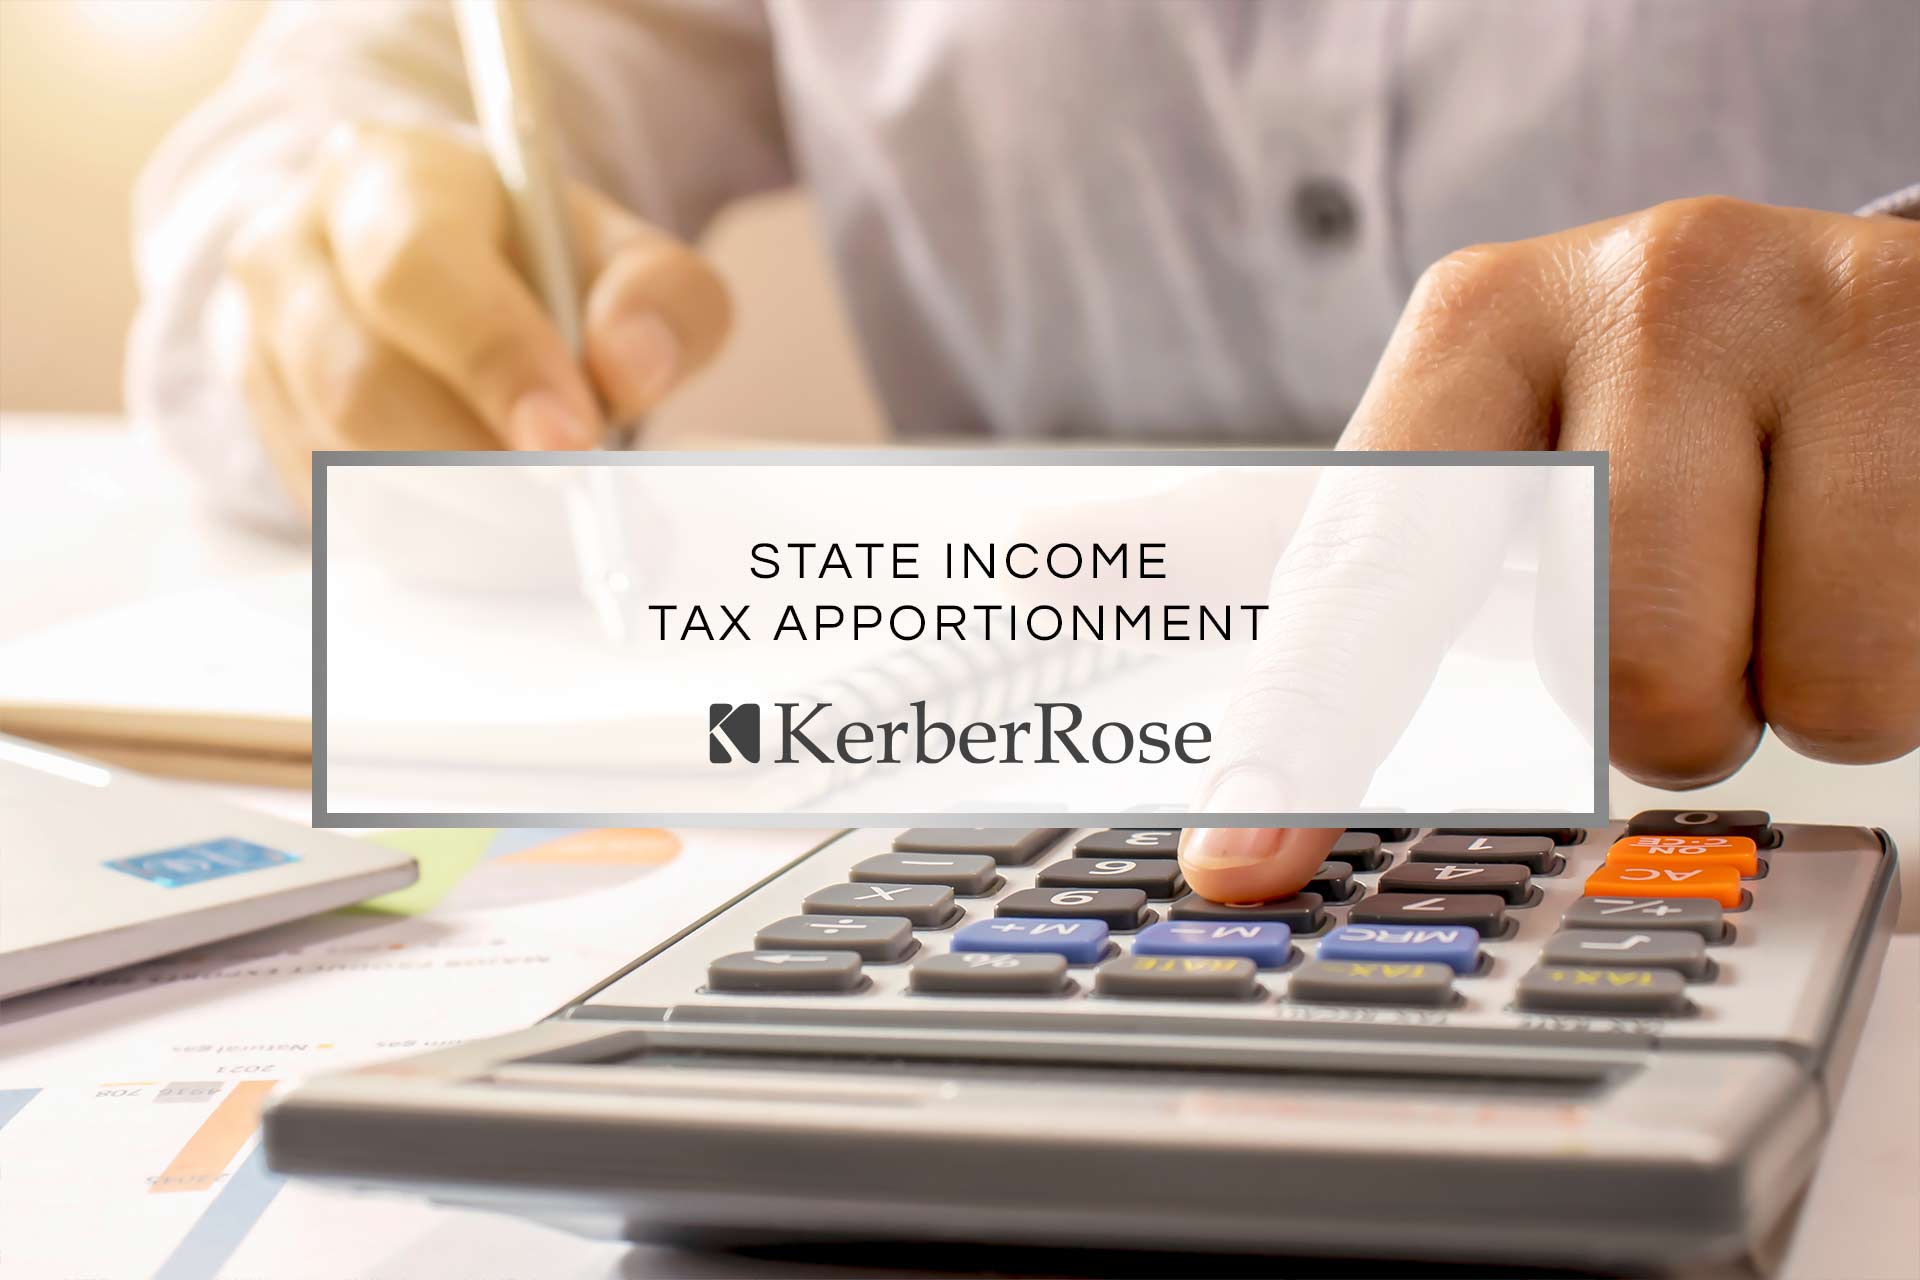 State Income Tax Apportionment: How Much of your Business's Income is Subject to State Tax? | KerberRose